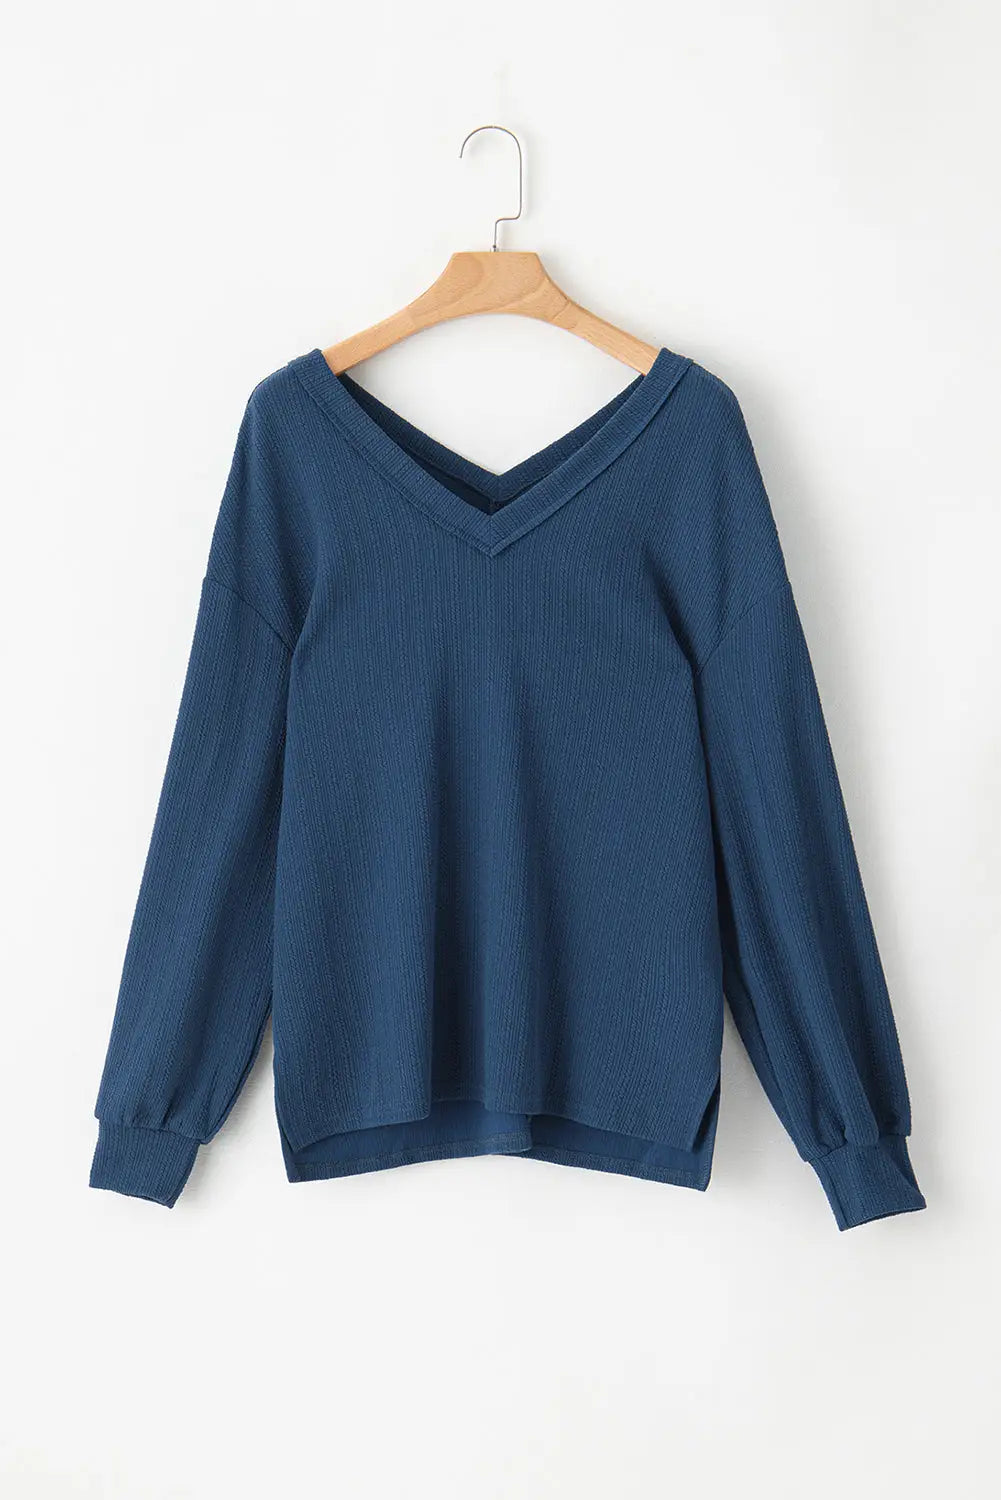 Real teal v neck textured long sleeve top - tops